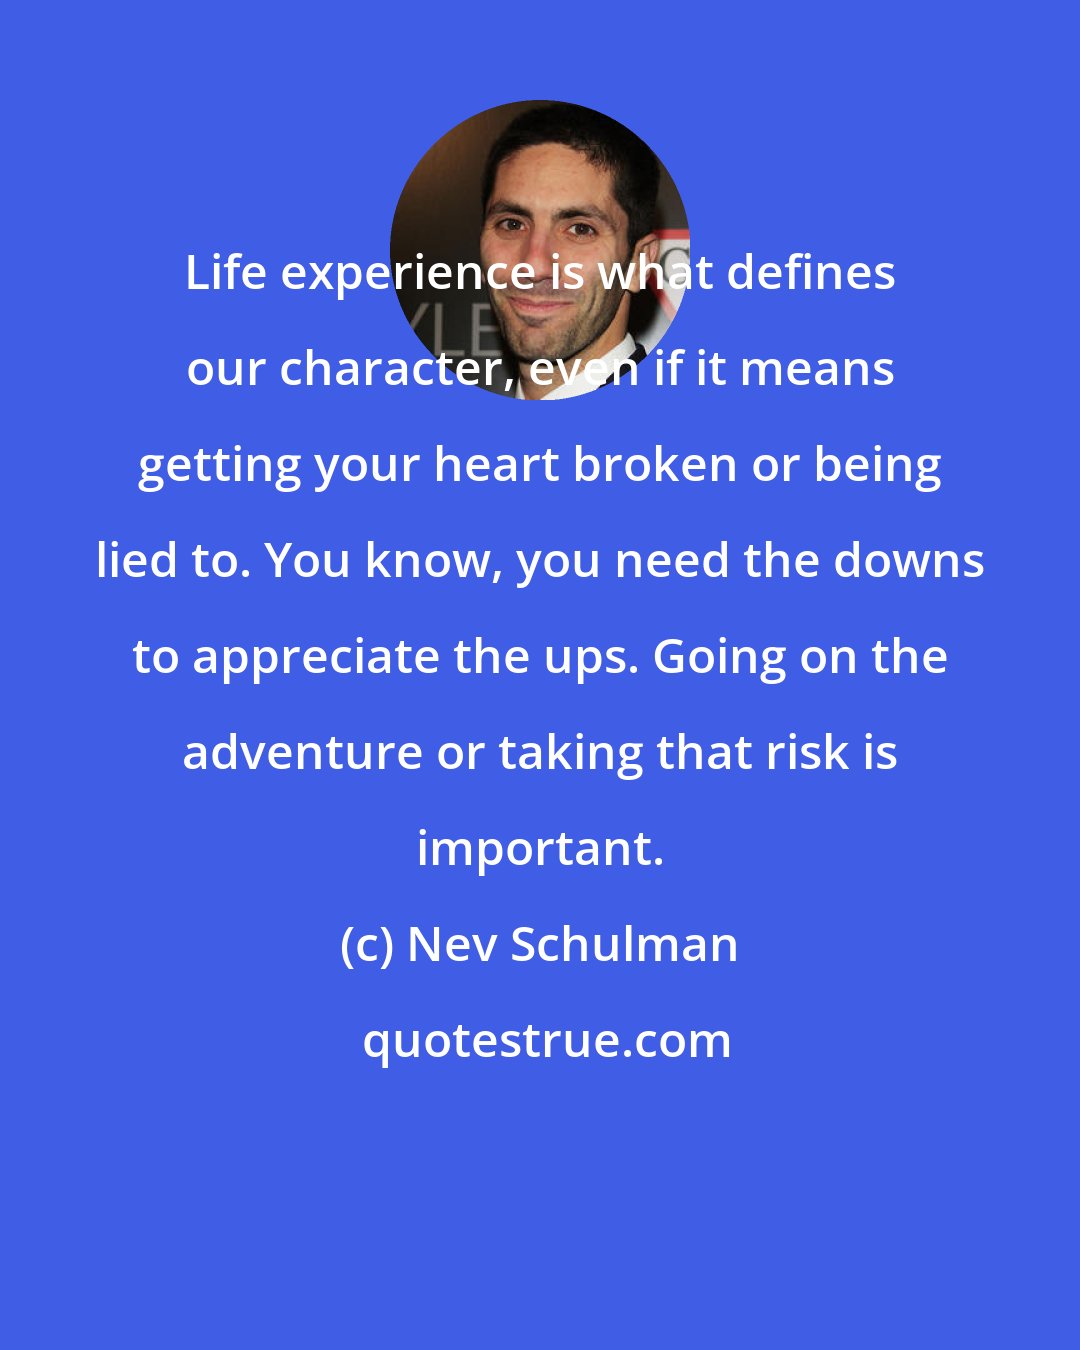 Nev Schulman: Life experience is what defines our character, even if it means getting your heart broken or being lied to. You know, you need the downs to appreciate the ups. Going on the adventure or taking that risk is important.